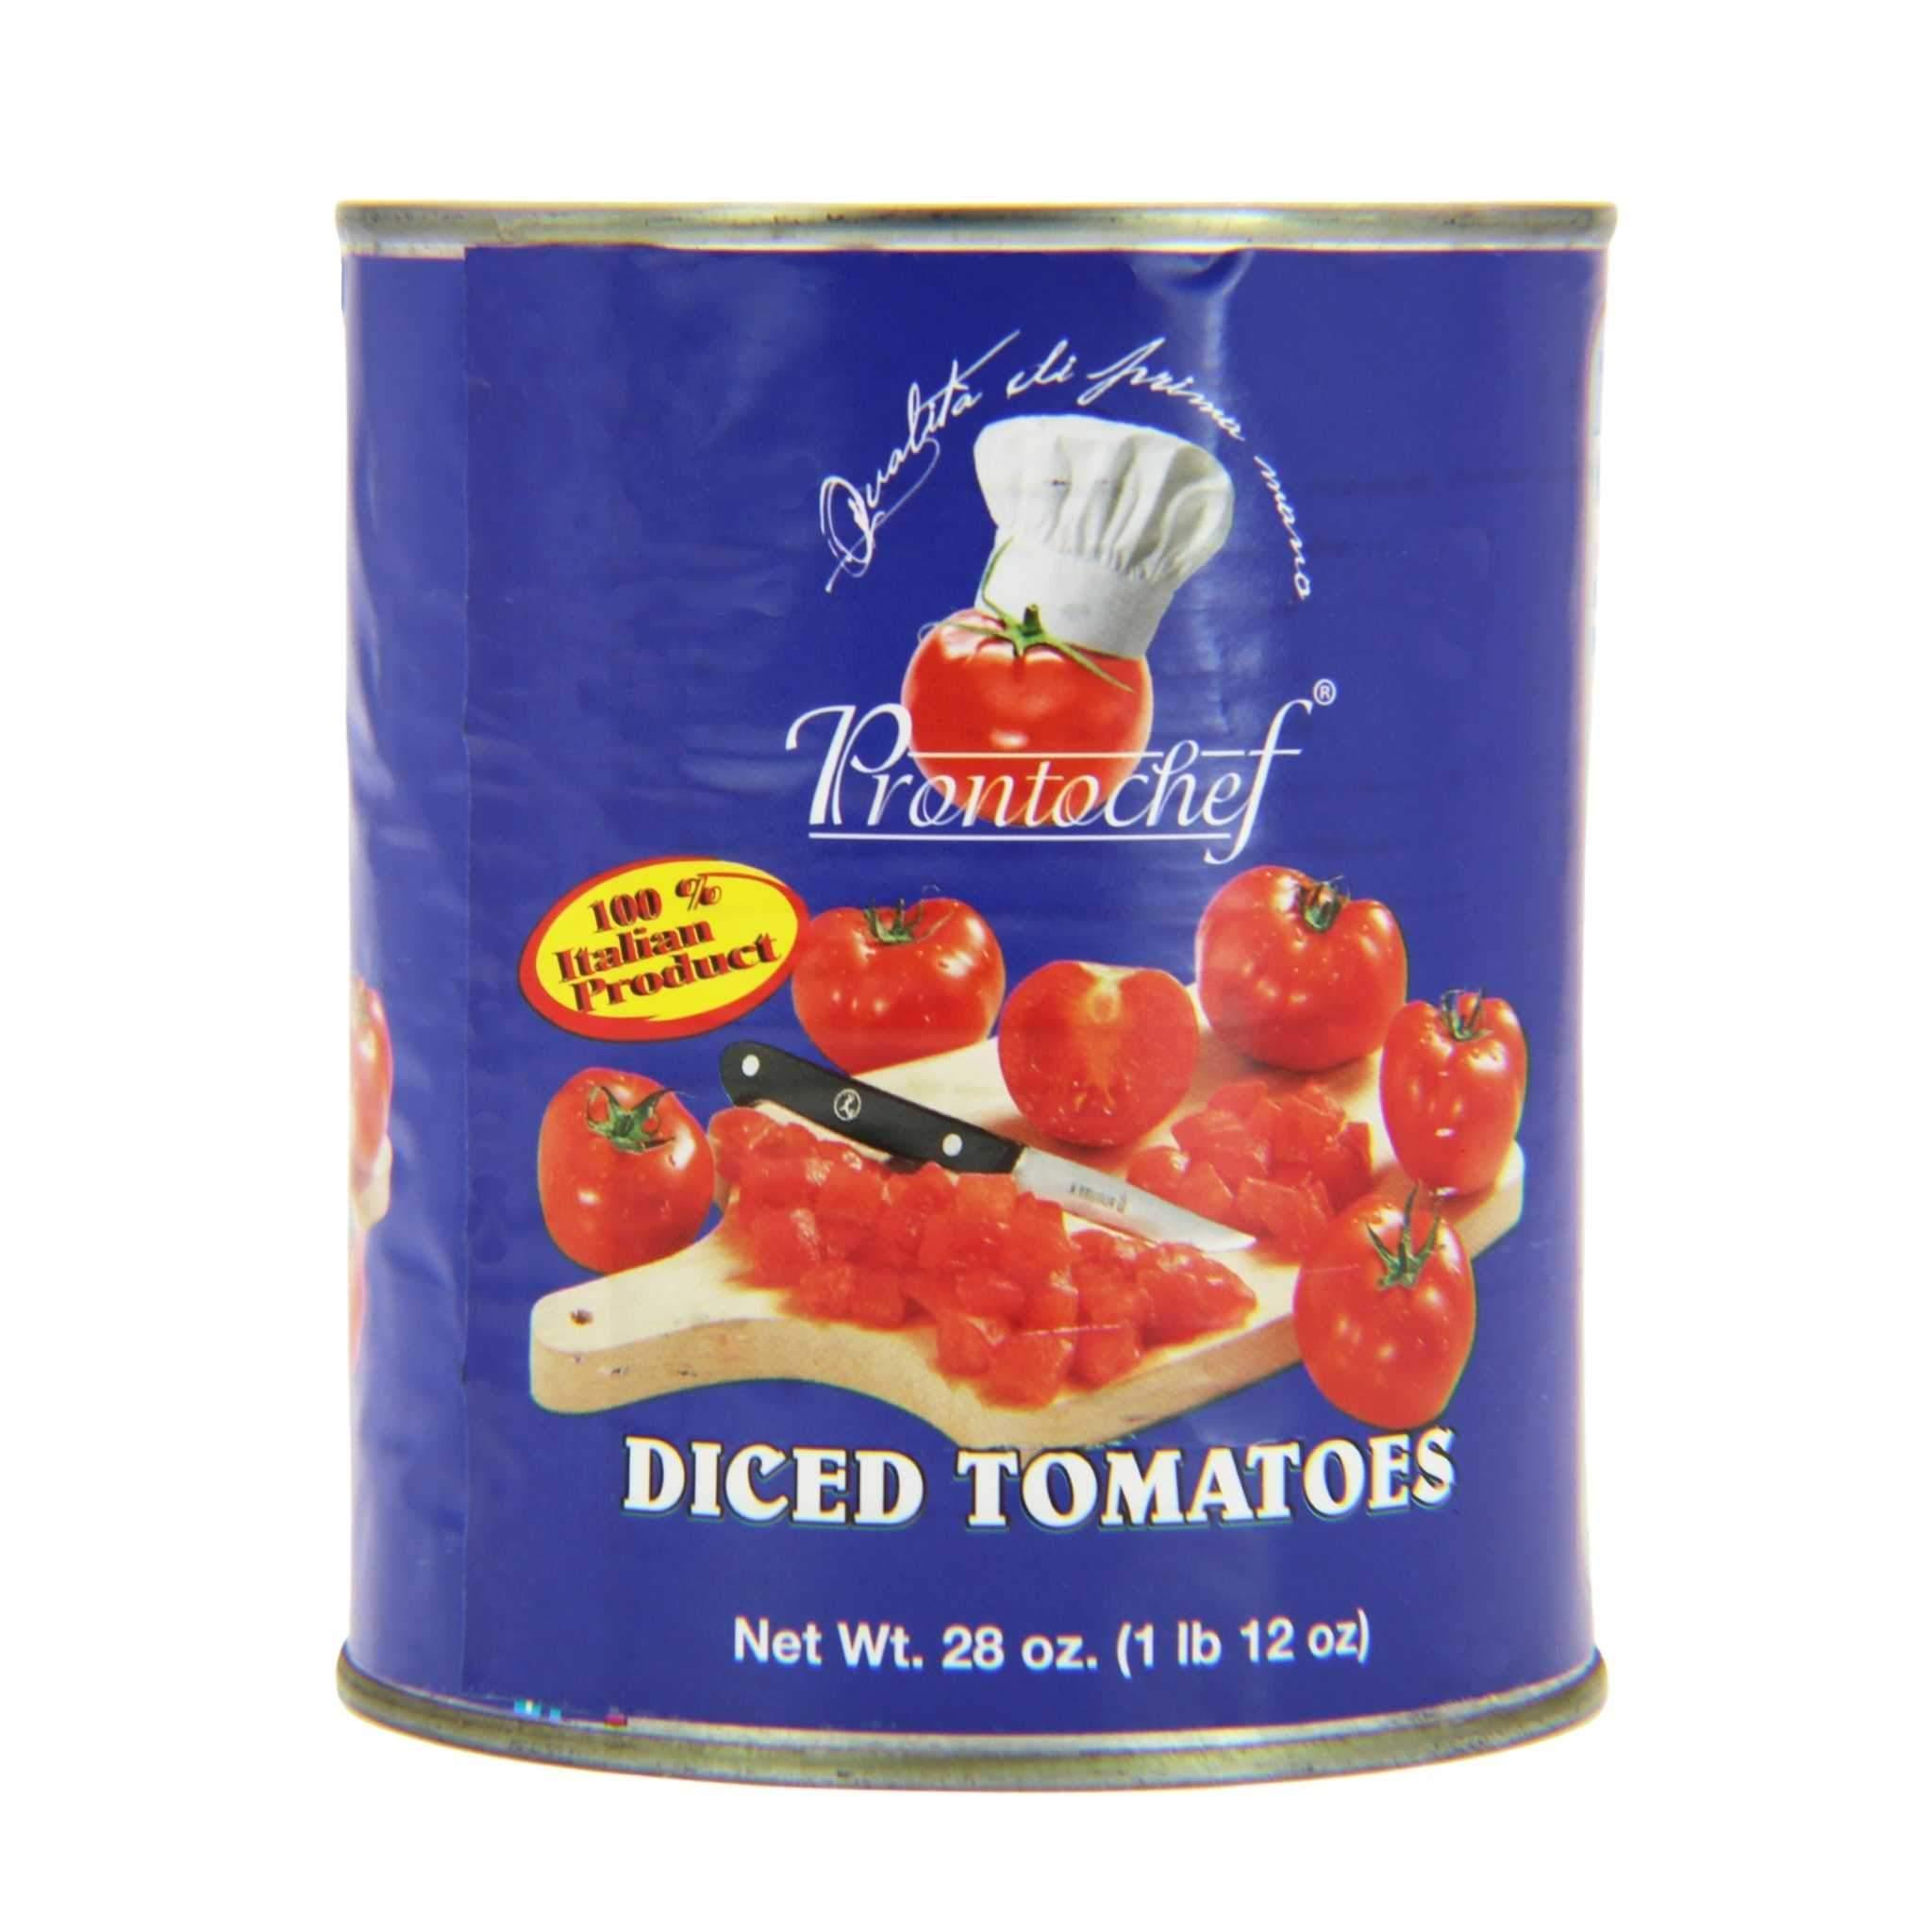 ProntoChef Diced Tomatoes 28 oz. can. - Wholesale Italian Food